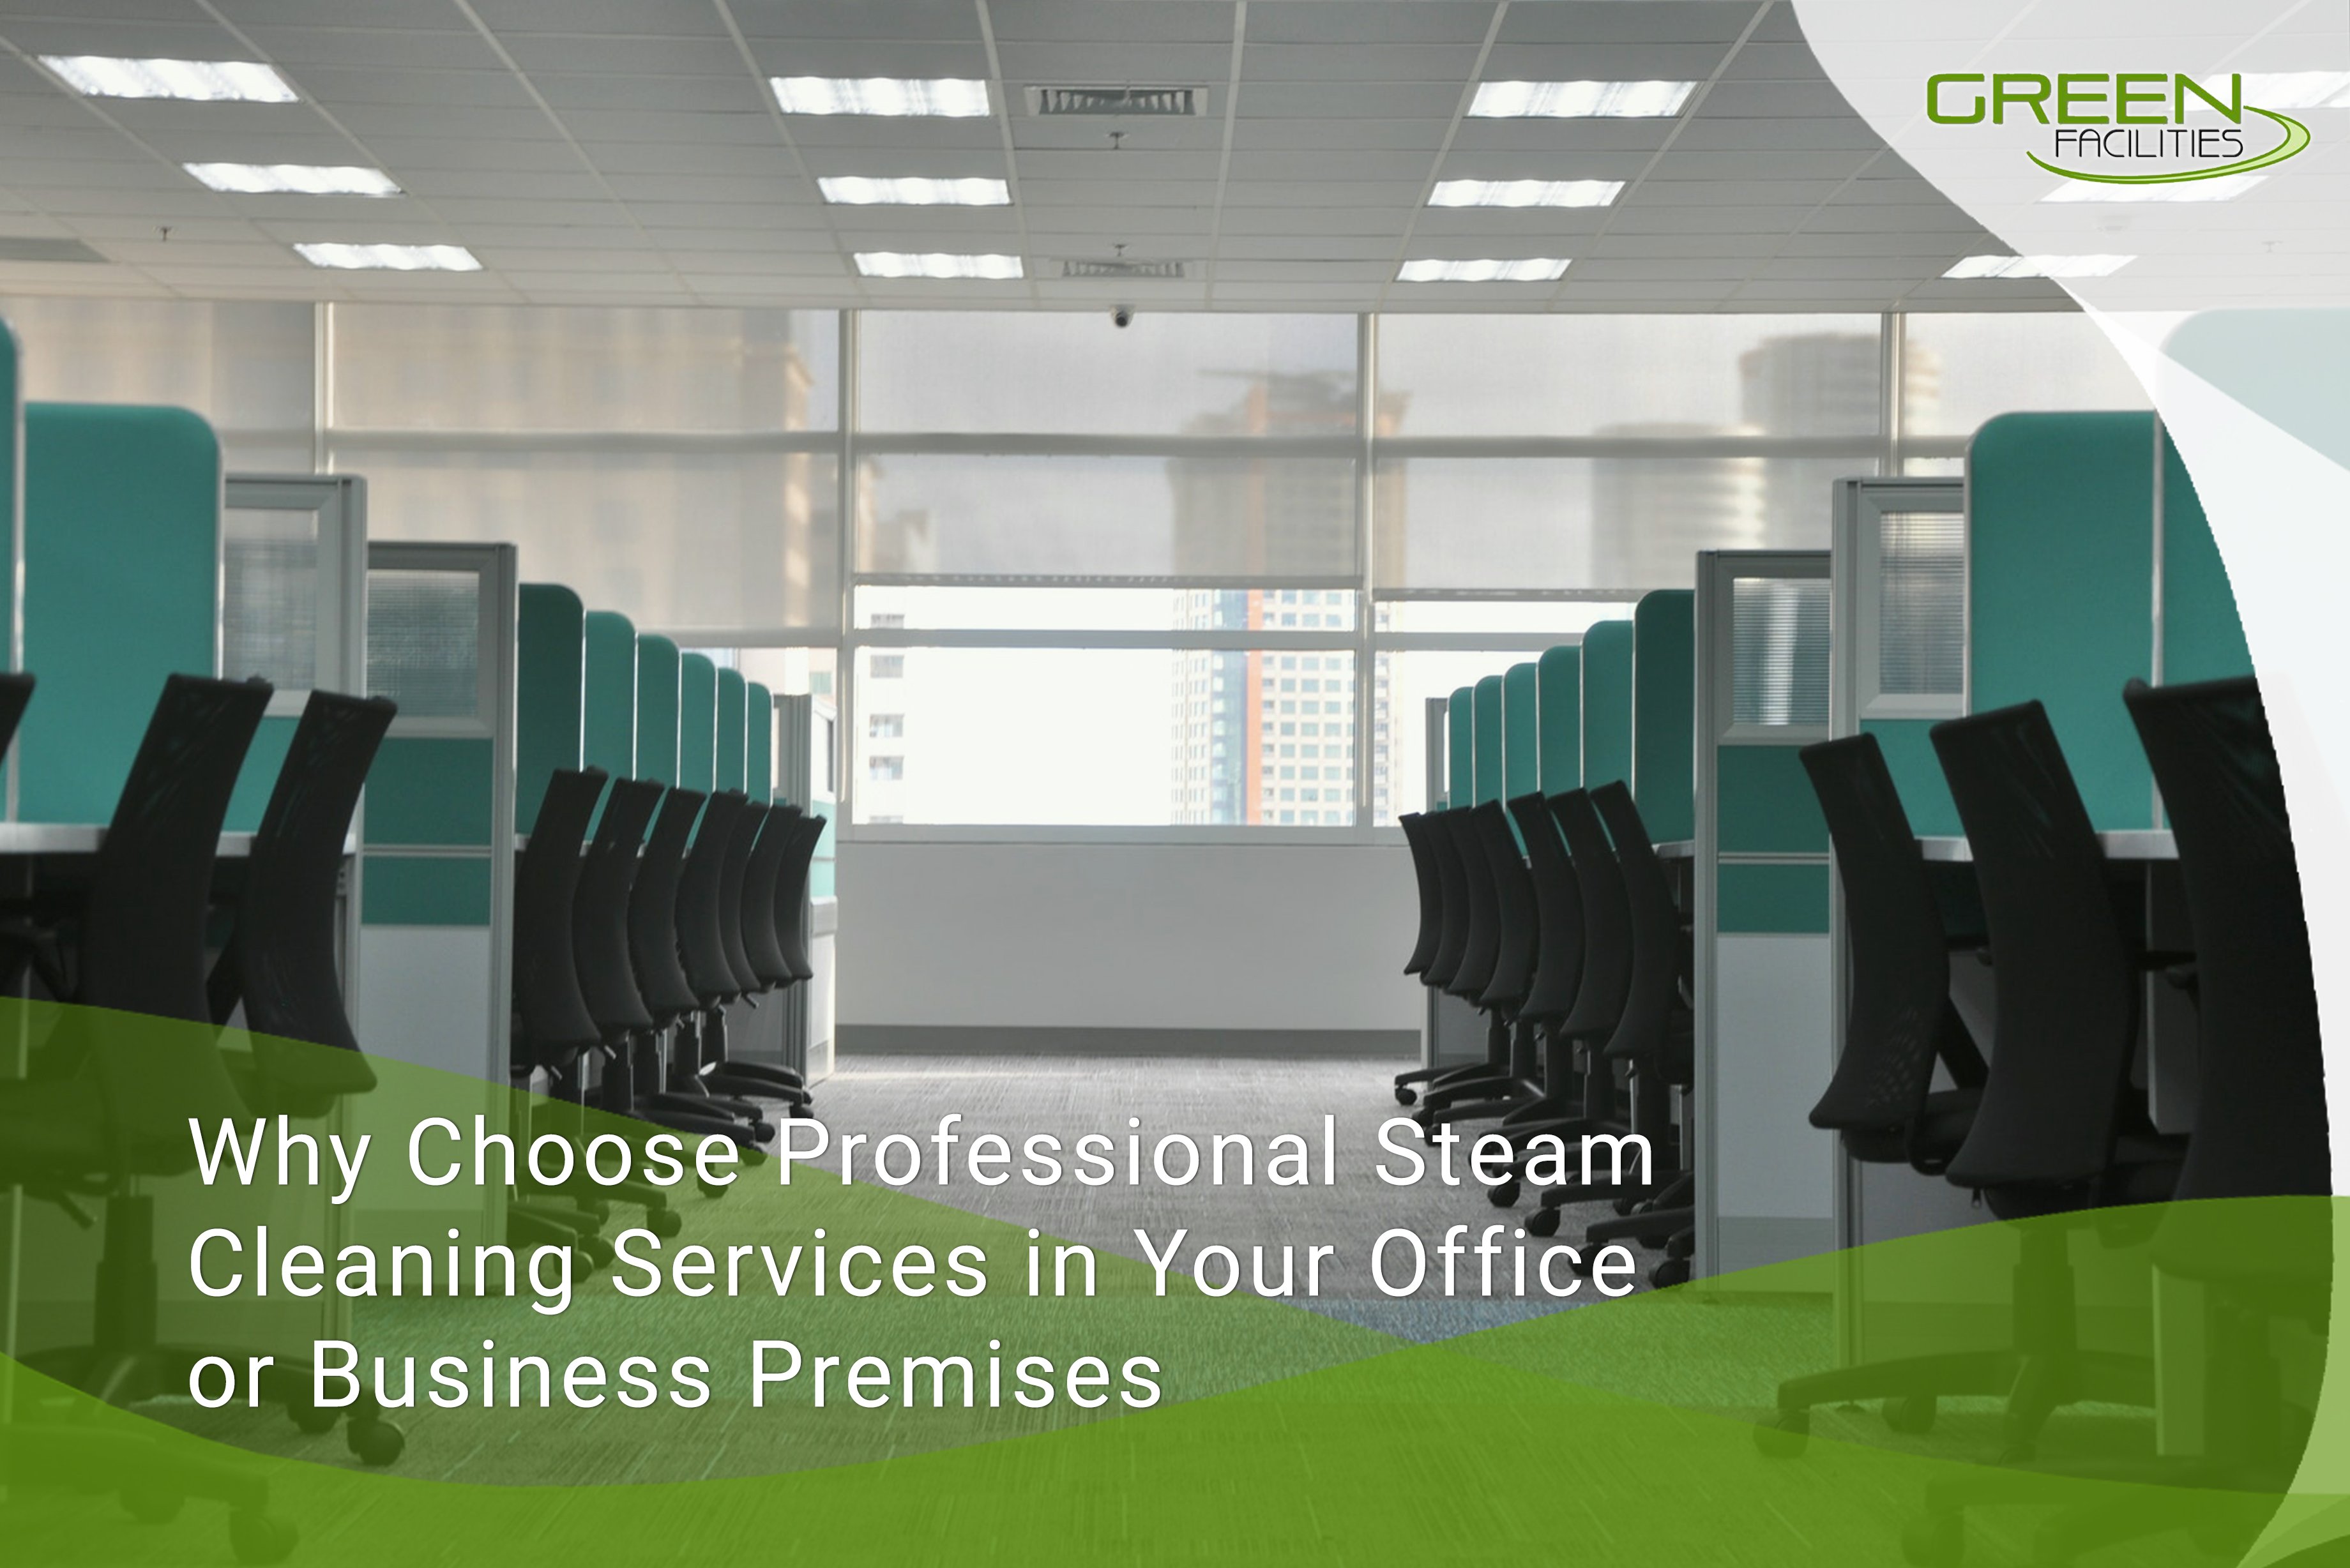 Why Choose Professional Steam Cleaning Services in Your Office or Business Premises